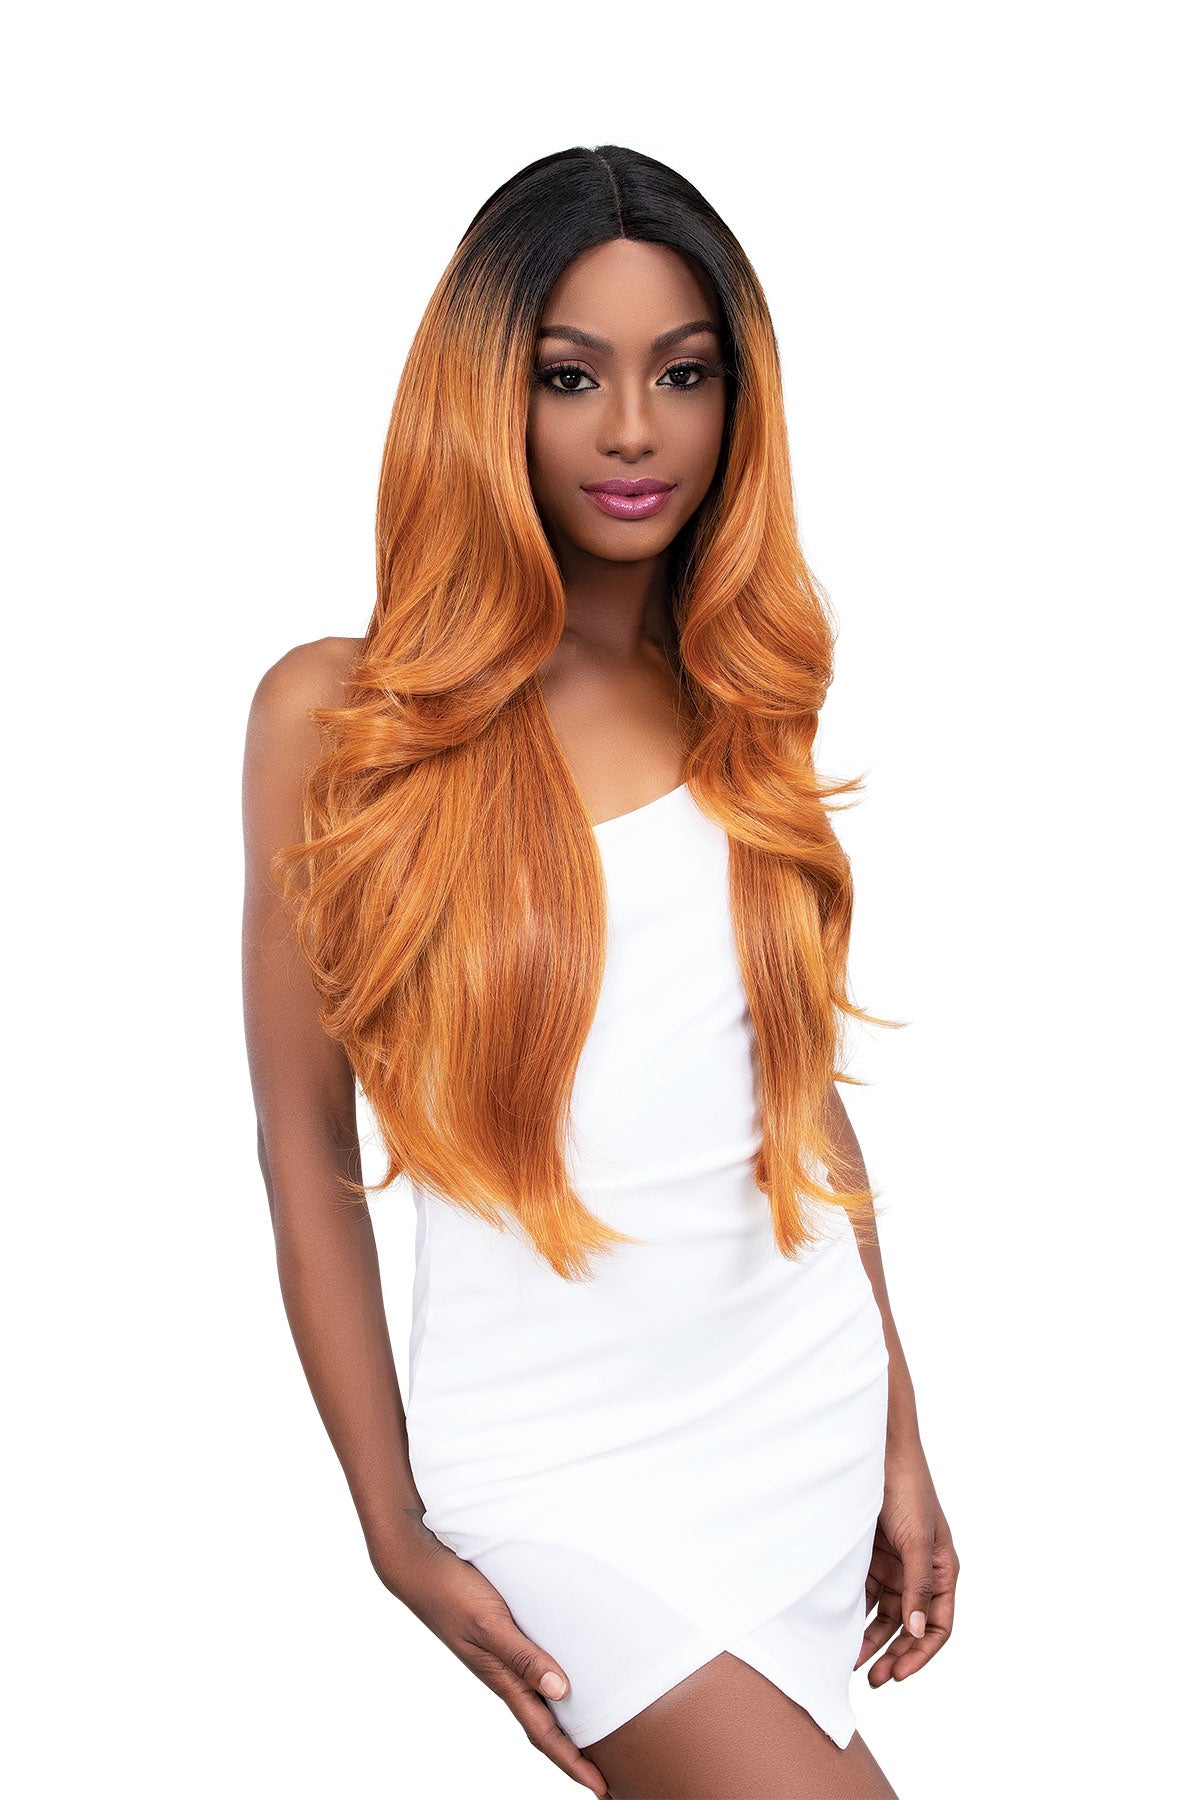 JANET COLLECTIONS - EXTENDED PART JUNNY WIG